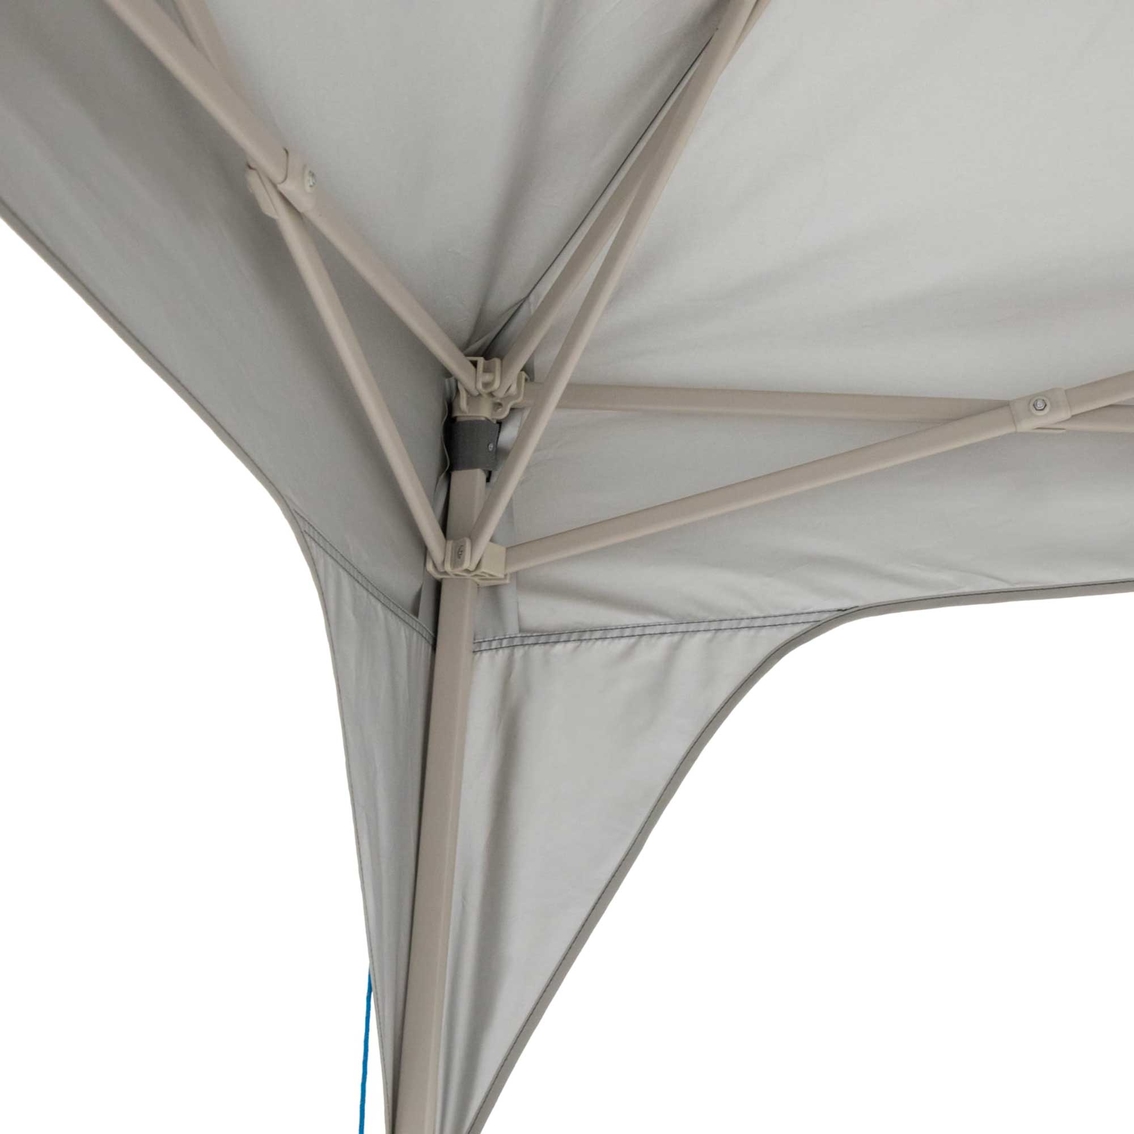 Outdoor Products 10x10 Slant Leg Canopy - Image 3 of 10